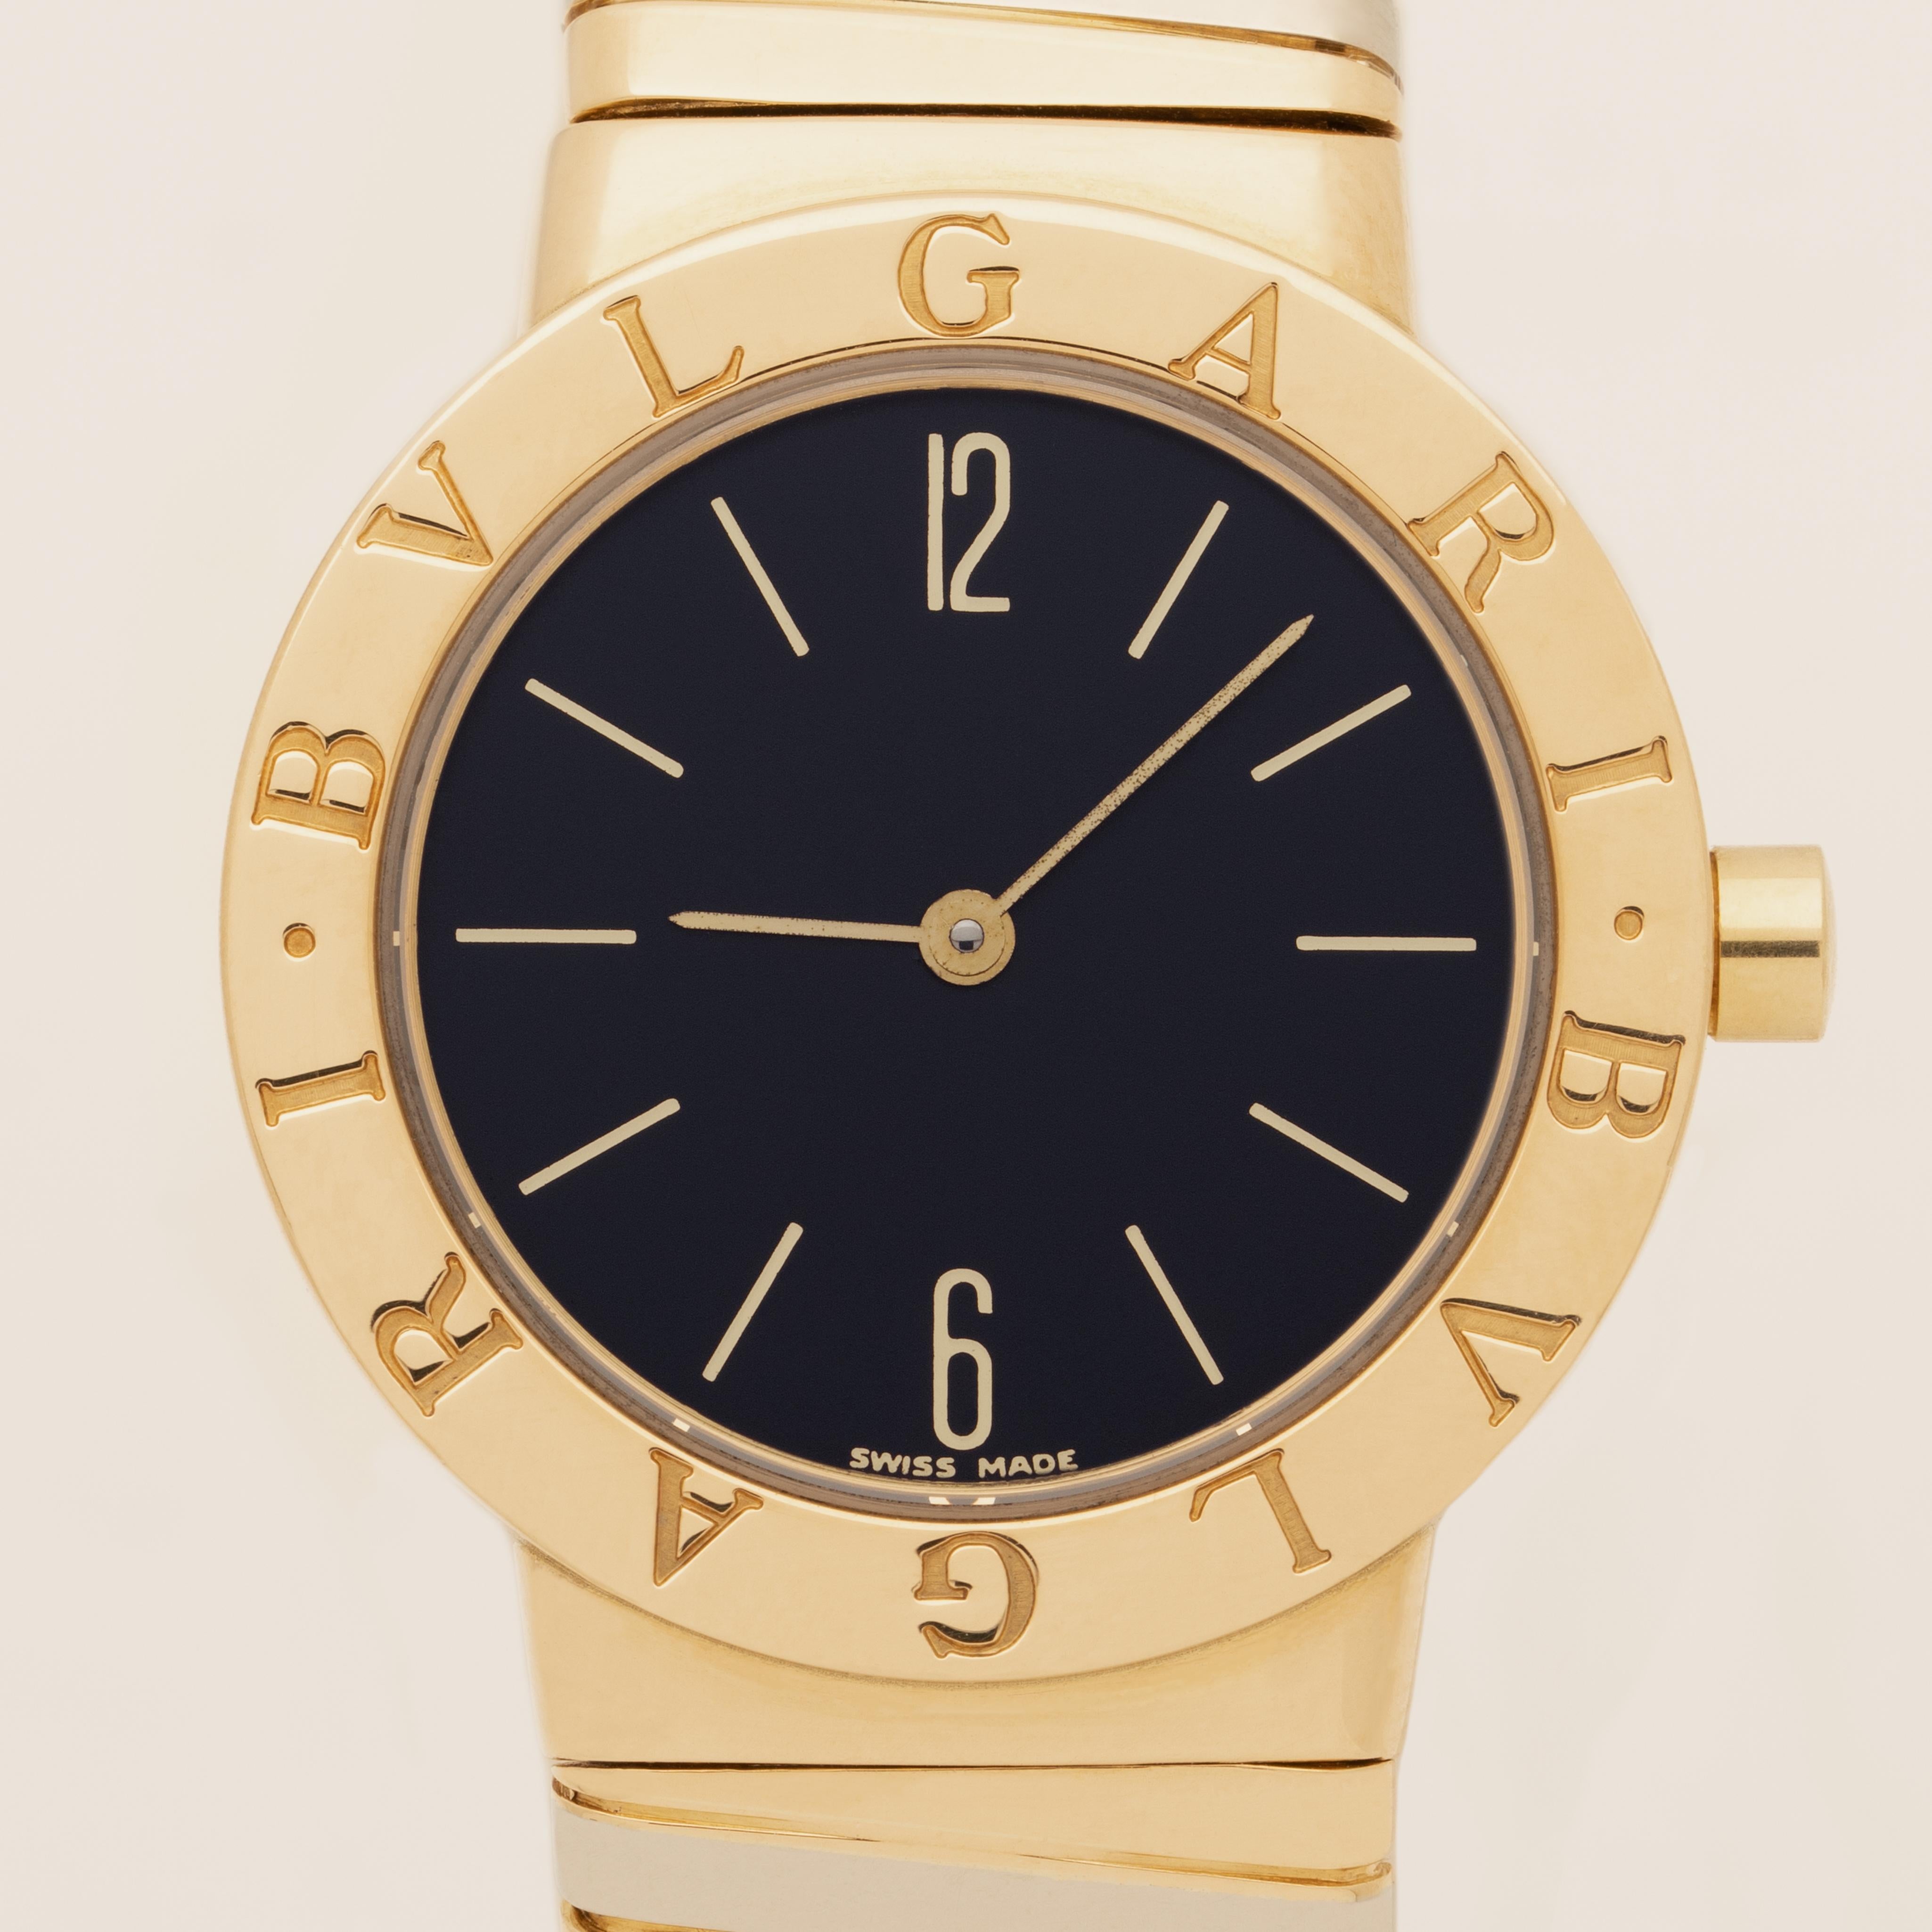 Bvlgari Bulgari  18 Karat Yellow and White Gold Rare Large Dial Tubogas Watch model 	
BB 30 2T

30mm Dial - this model is more rare as they made fewer with this larger dial size
Quartz Movement
Guaranteed Authentic 

Stephanie Windsor guarantees the